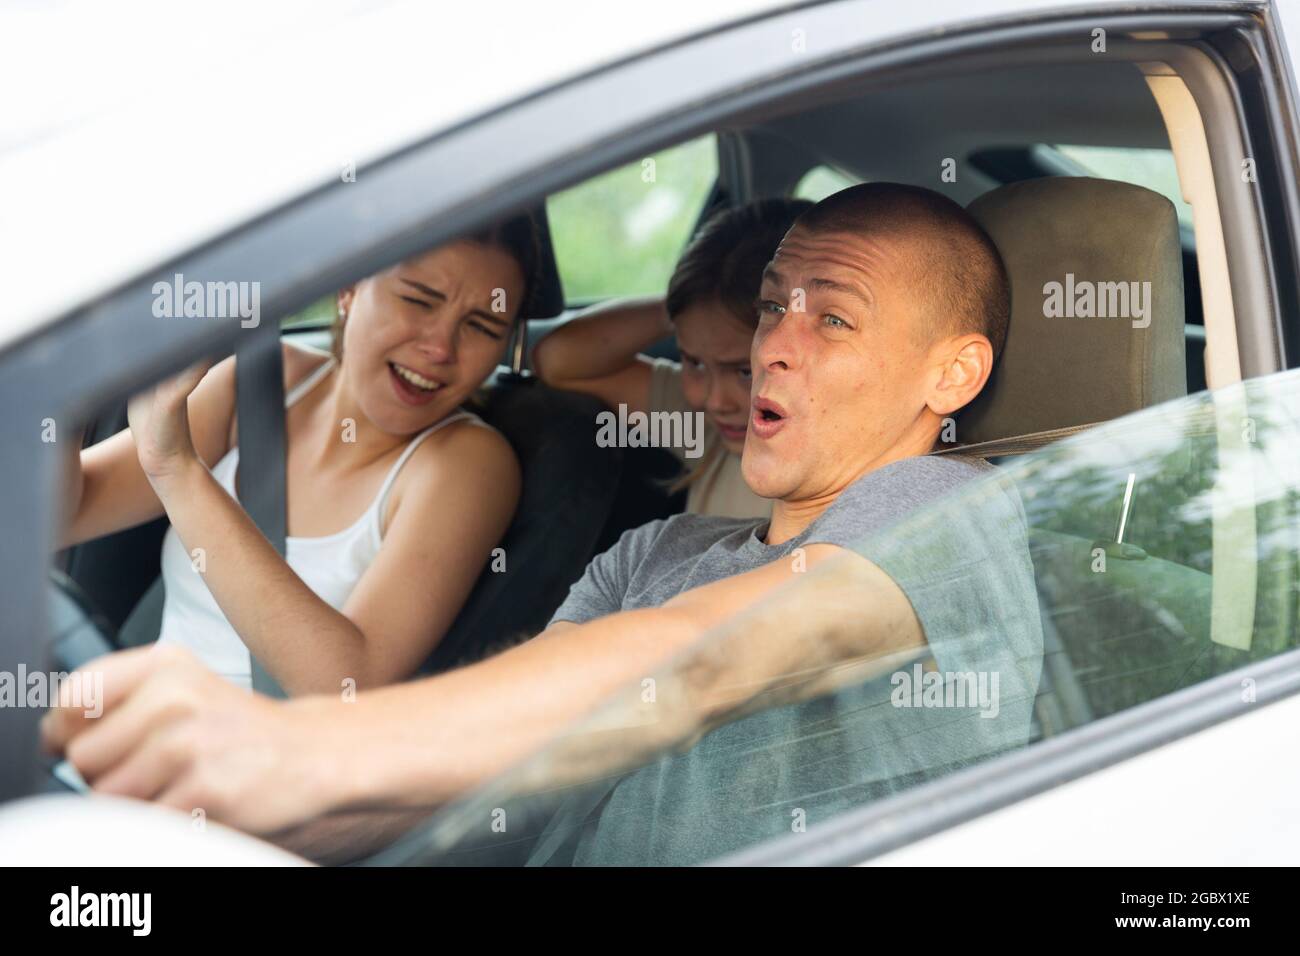 Man driver, his wife and doughter scared screaming in the car Stock Photo